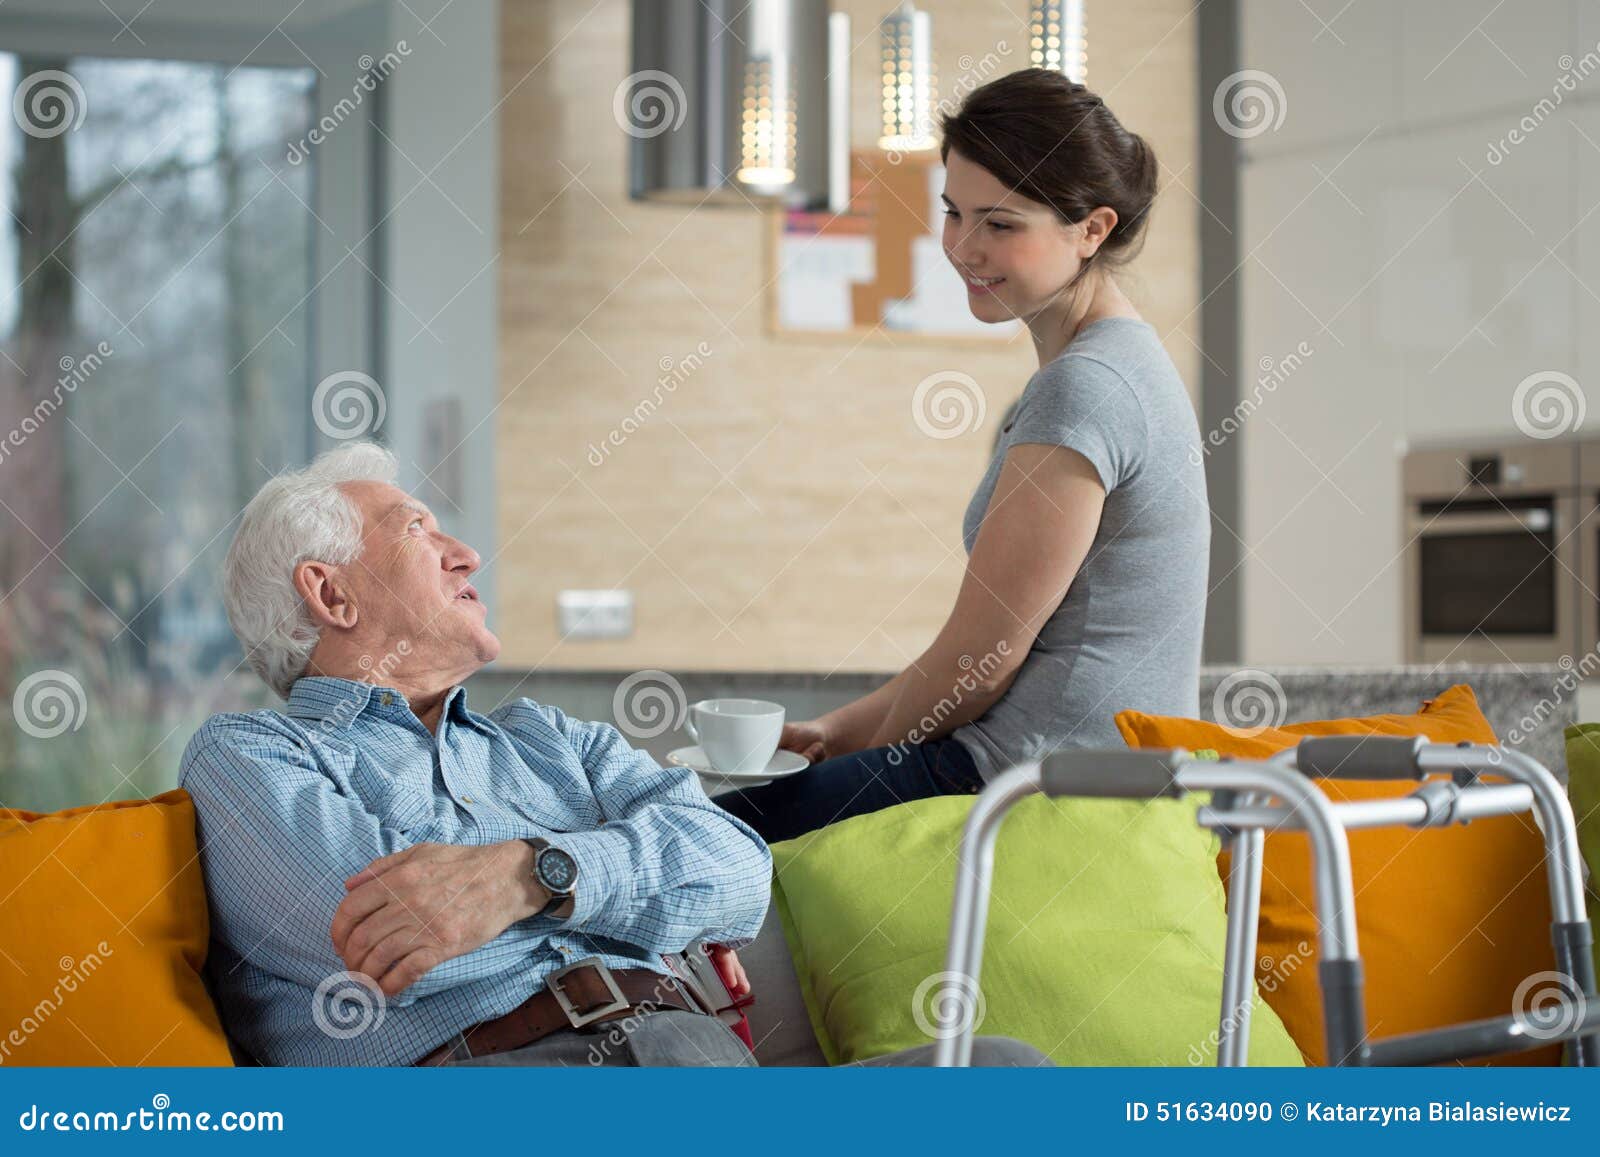 grandfather talking with loved granddaughter